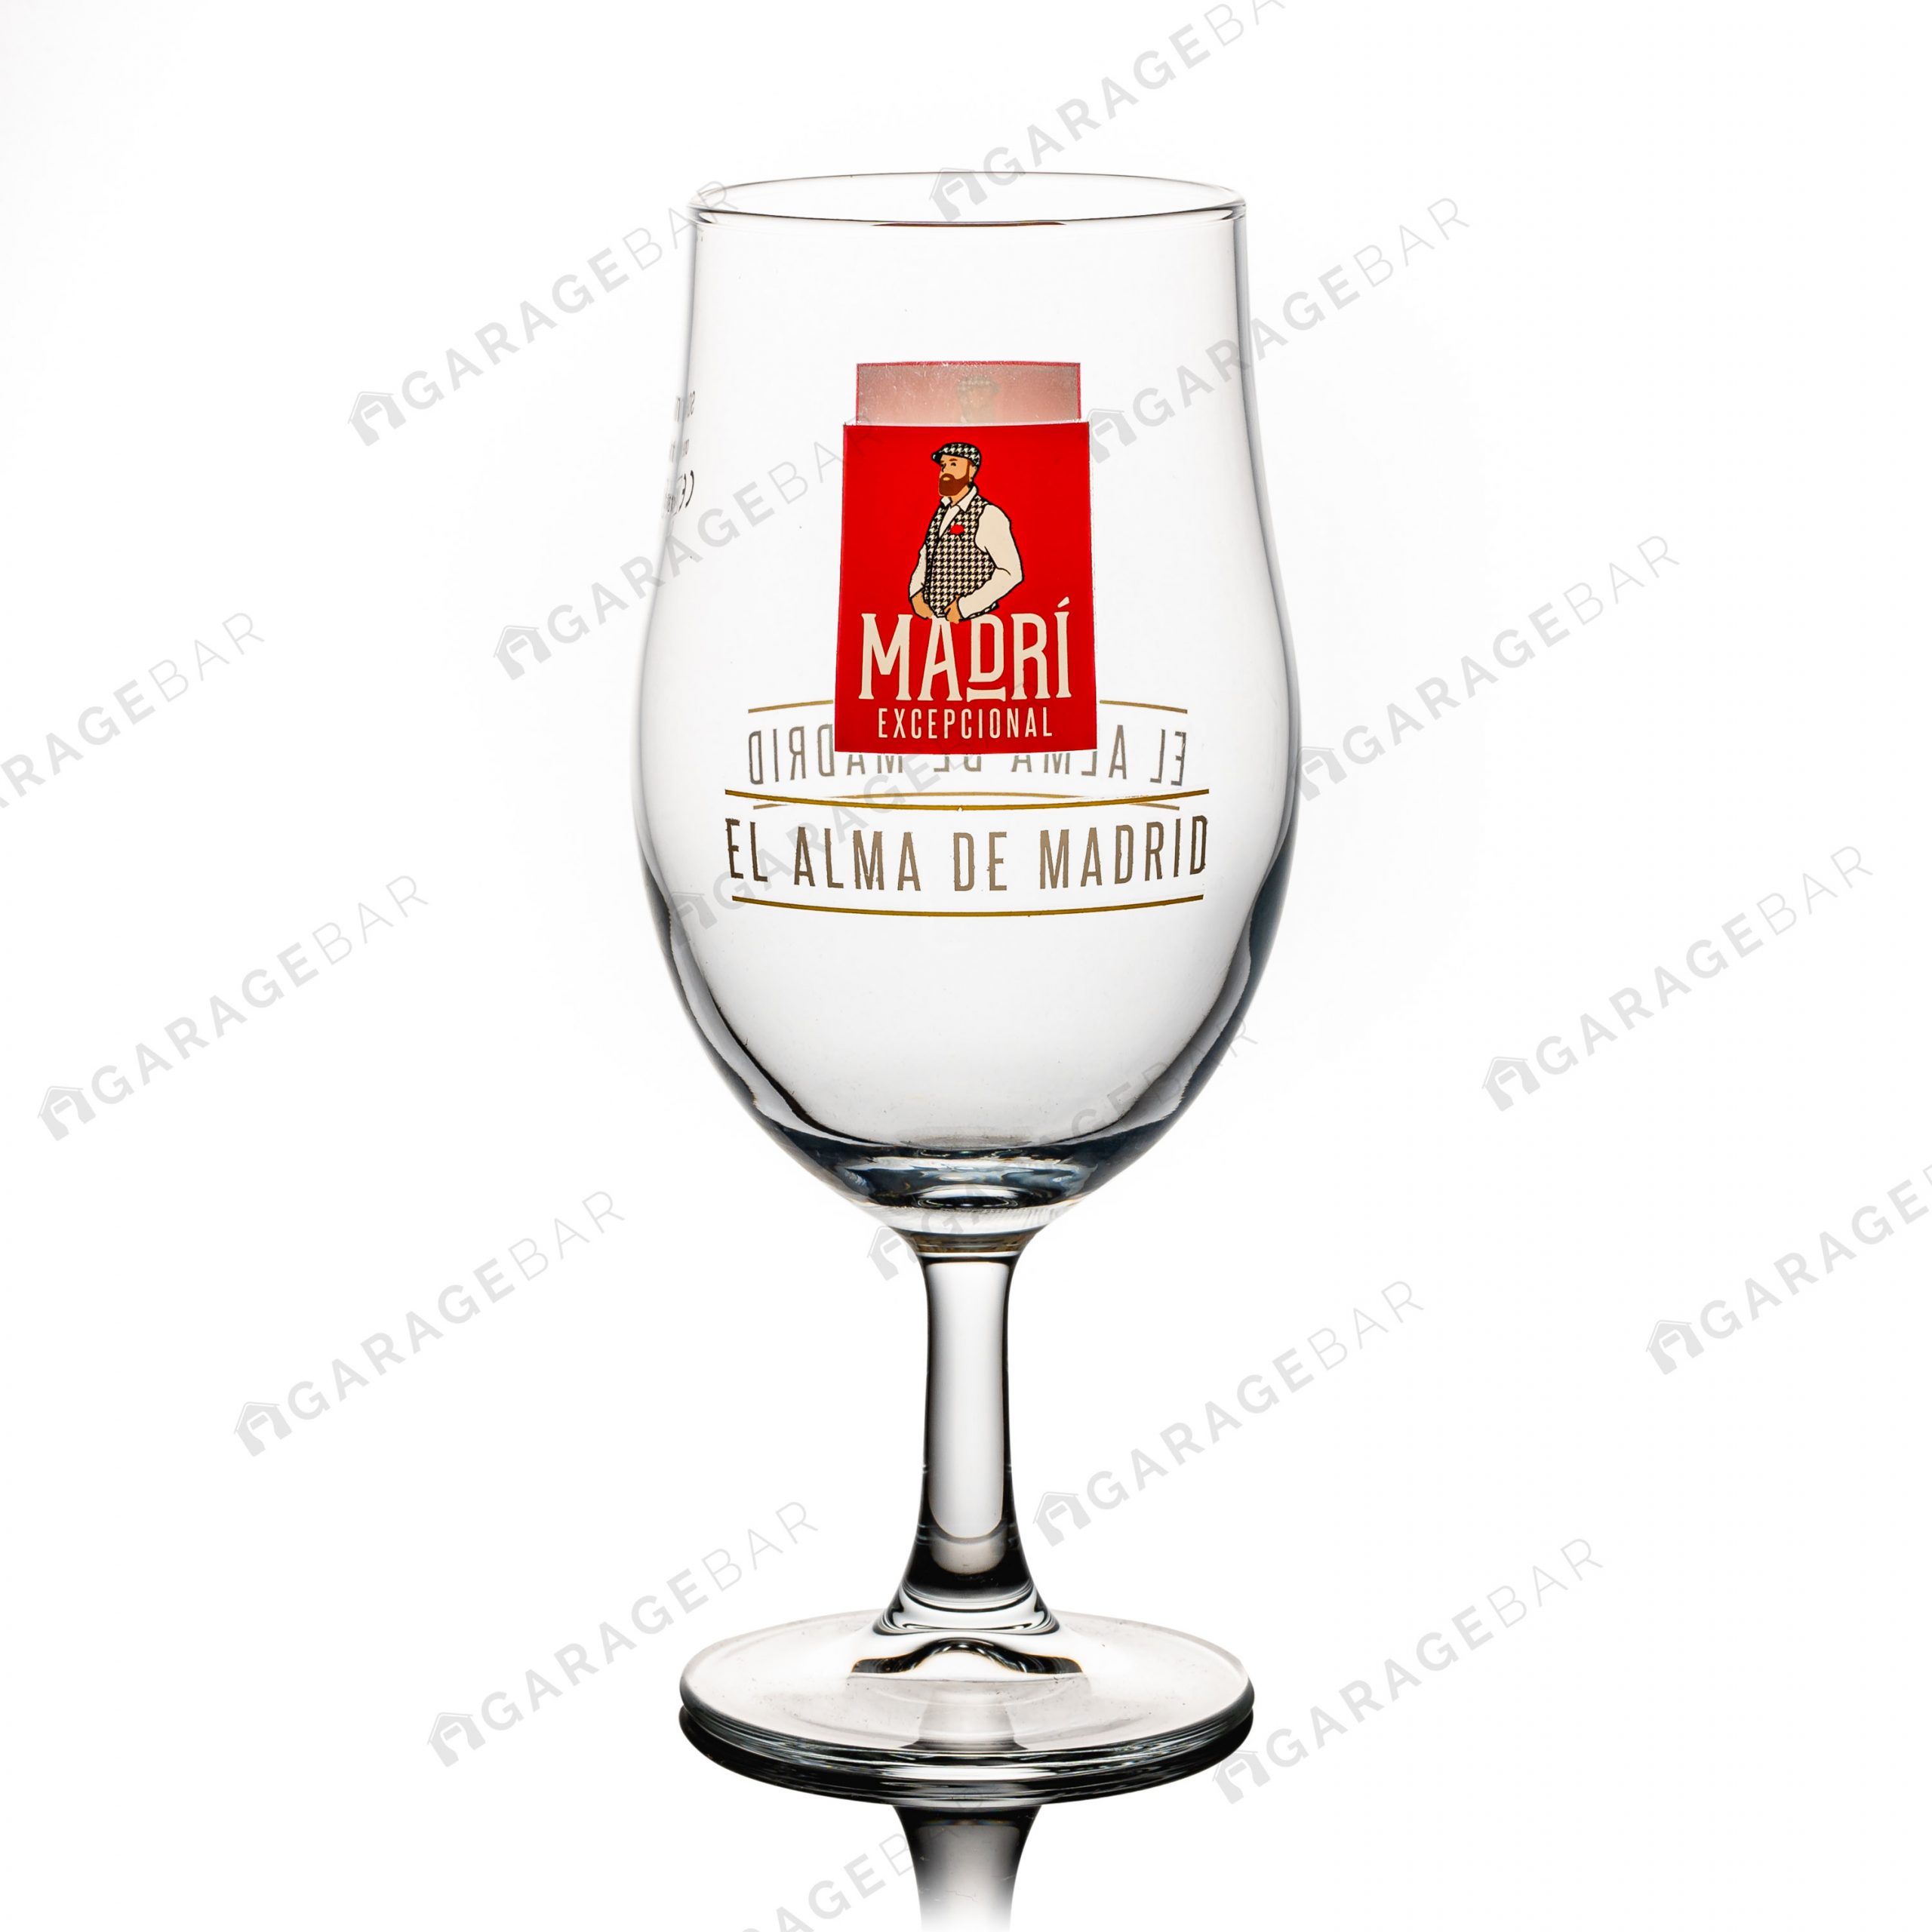 Madri Exceptional Pint Beer Glass